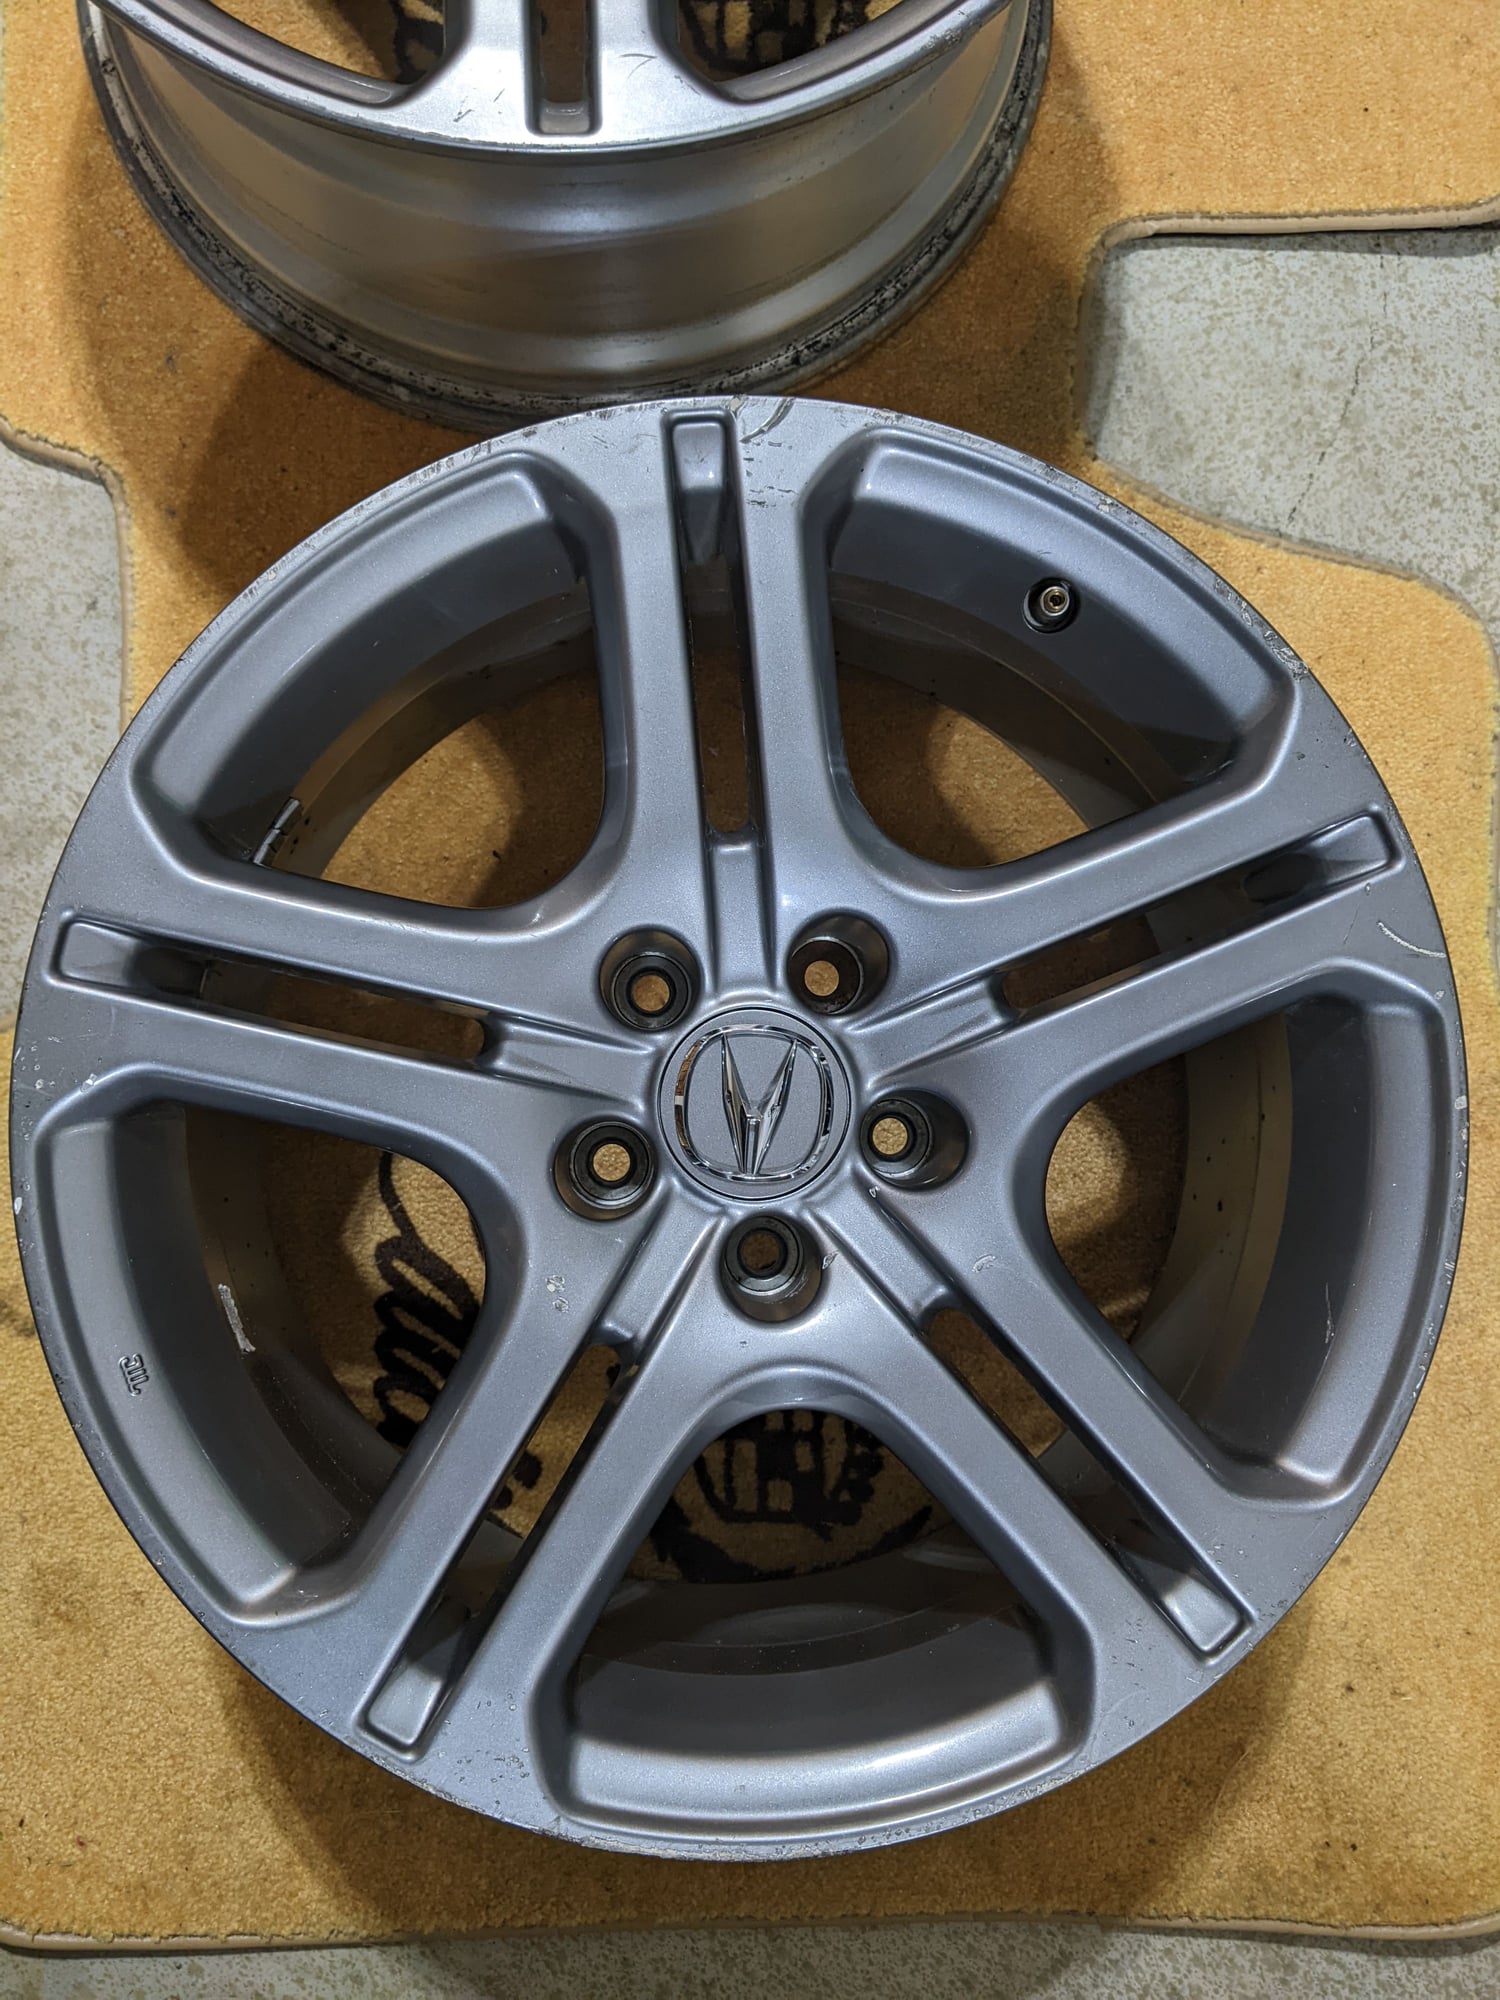 Wheels and Tires/Axles - FS: 3G TL OEM ASPEC wheels 18" x 8.5" - Used - 2004 to 2008 Acura TL - Plain City, OH 43064, United States